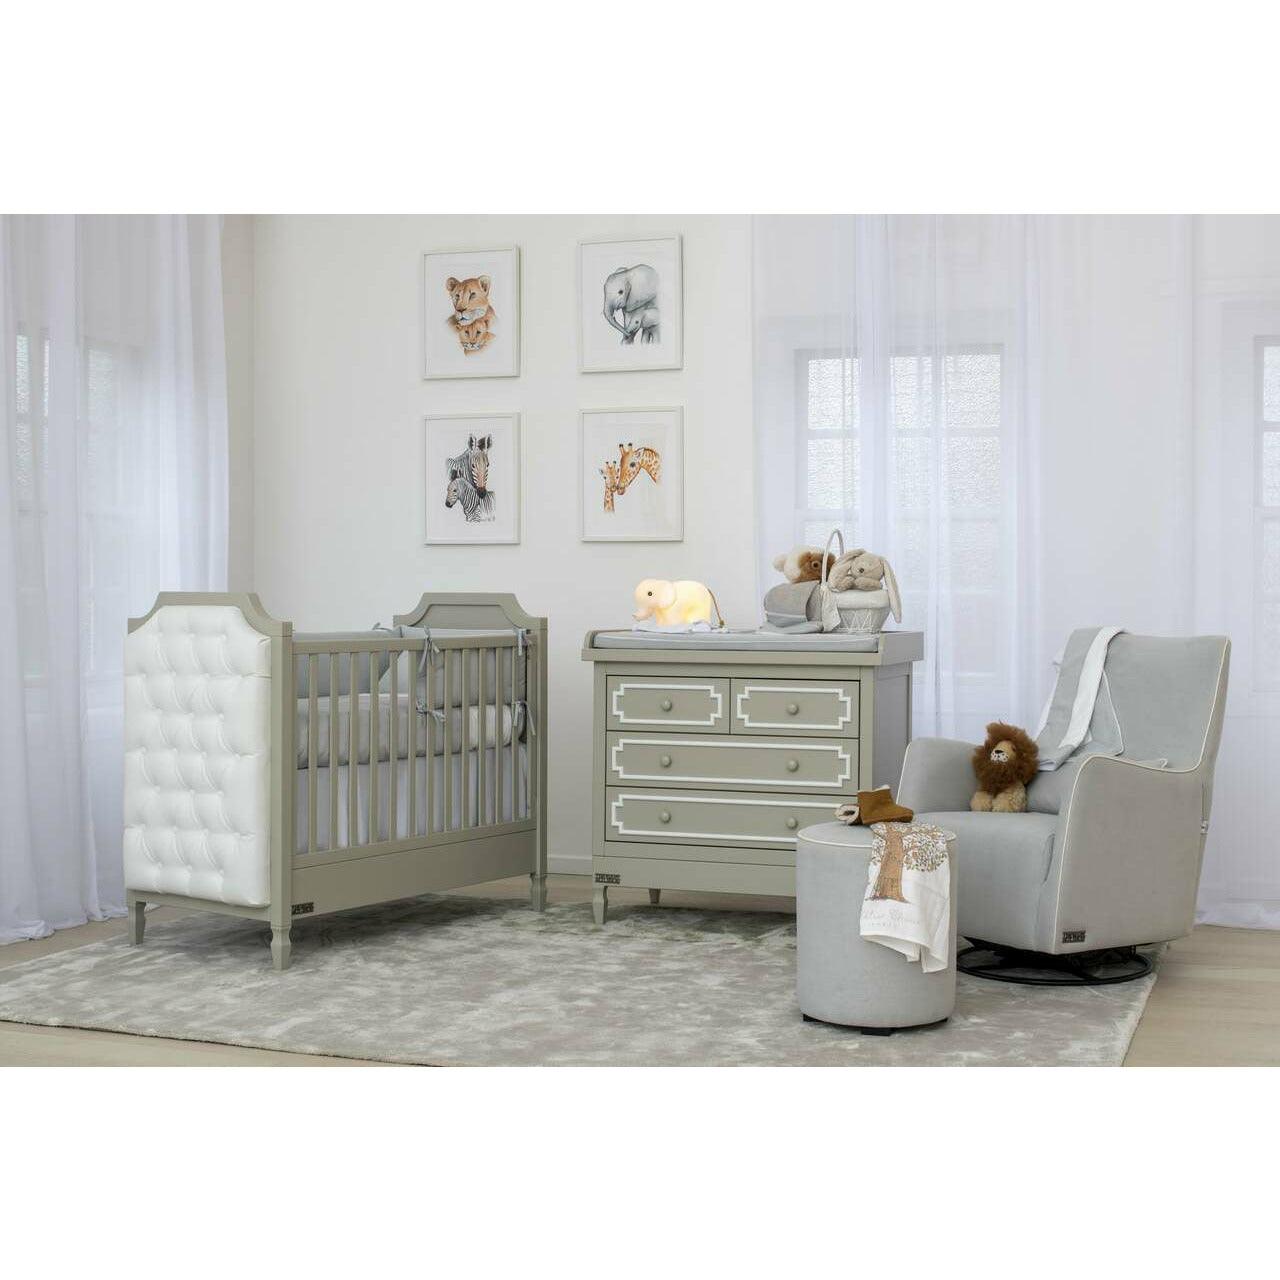 Regency Changing Unit - The Baby Cot Shop, Chelsea